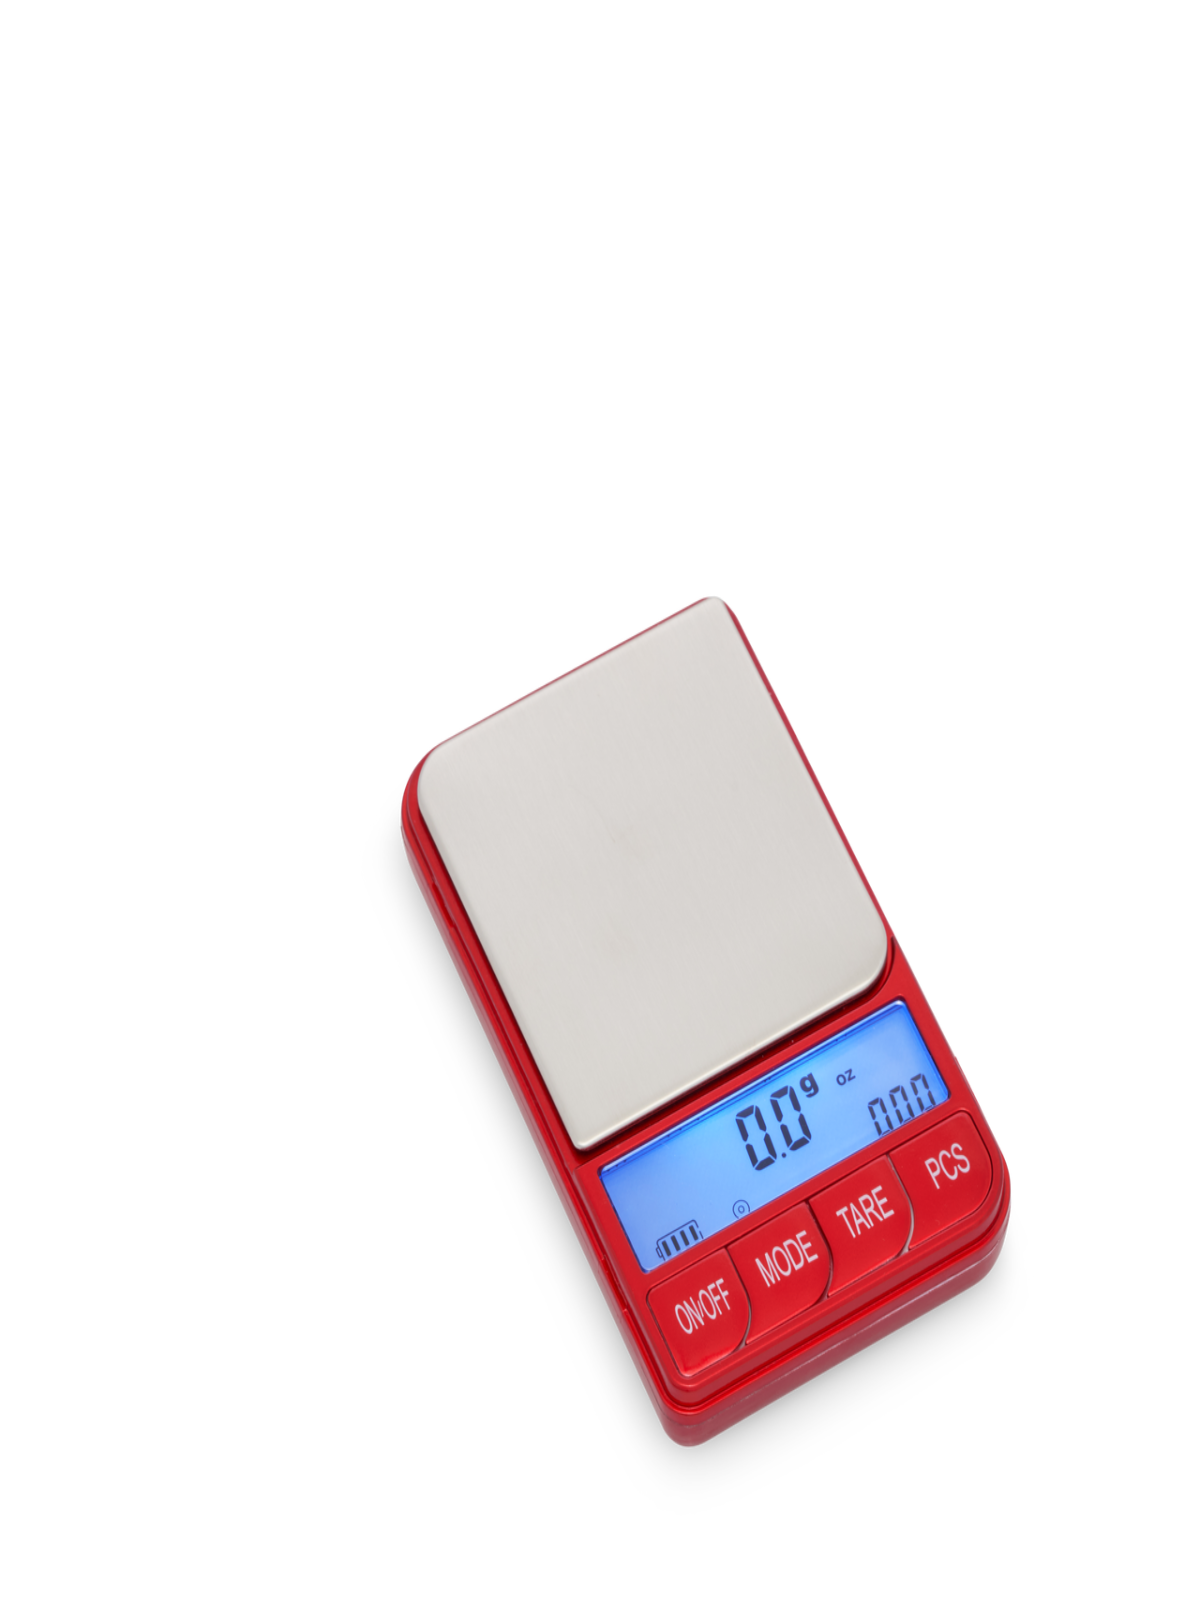 SC2kg Precision Digital Pocket Scale - American Weigh Scales